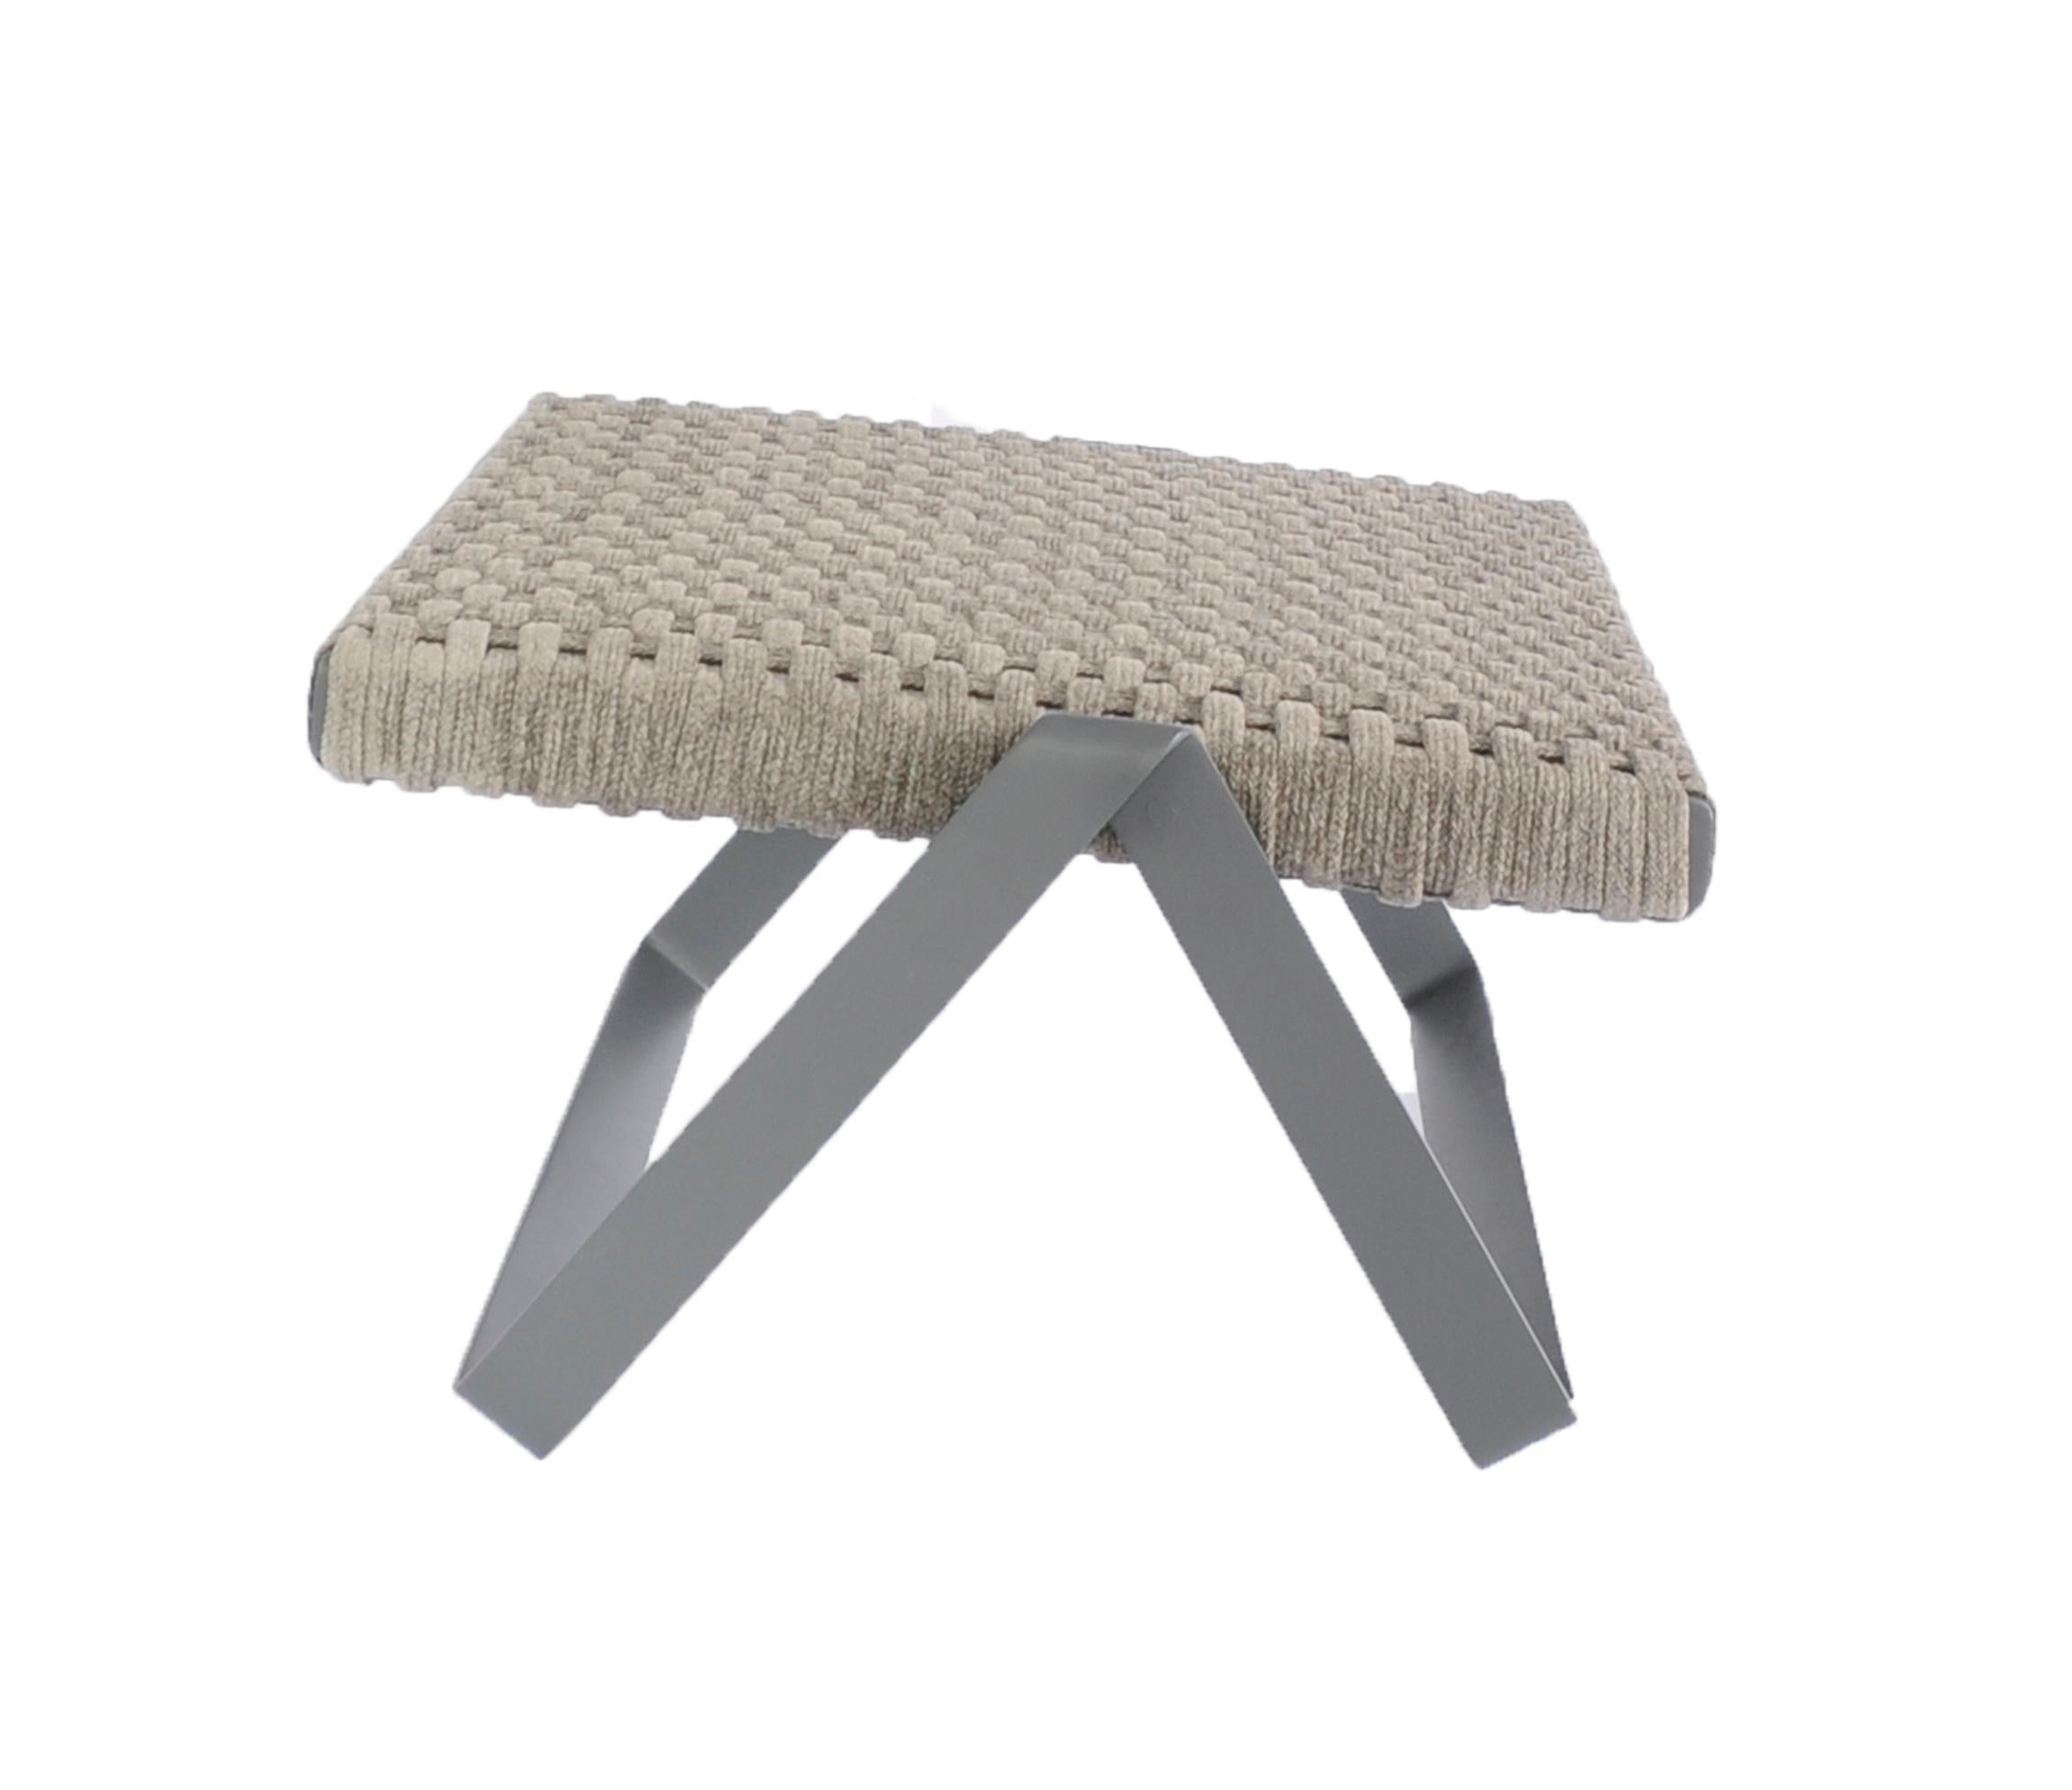 The Dobra outdoor footstool is made to match the lounge chair part of the Dobra furniture line which is designed with the concept of a continuous steel bar folded to create legs and frames for the different components.
